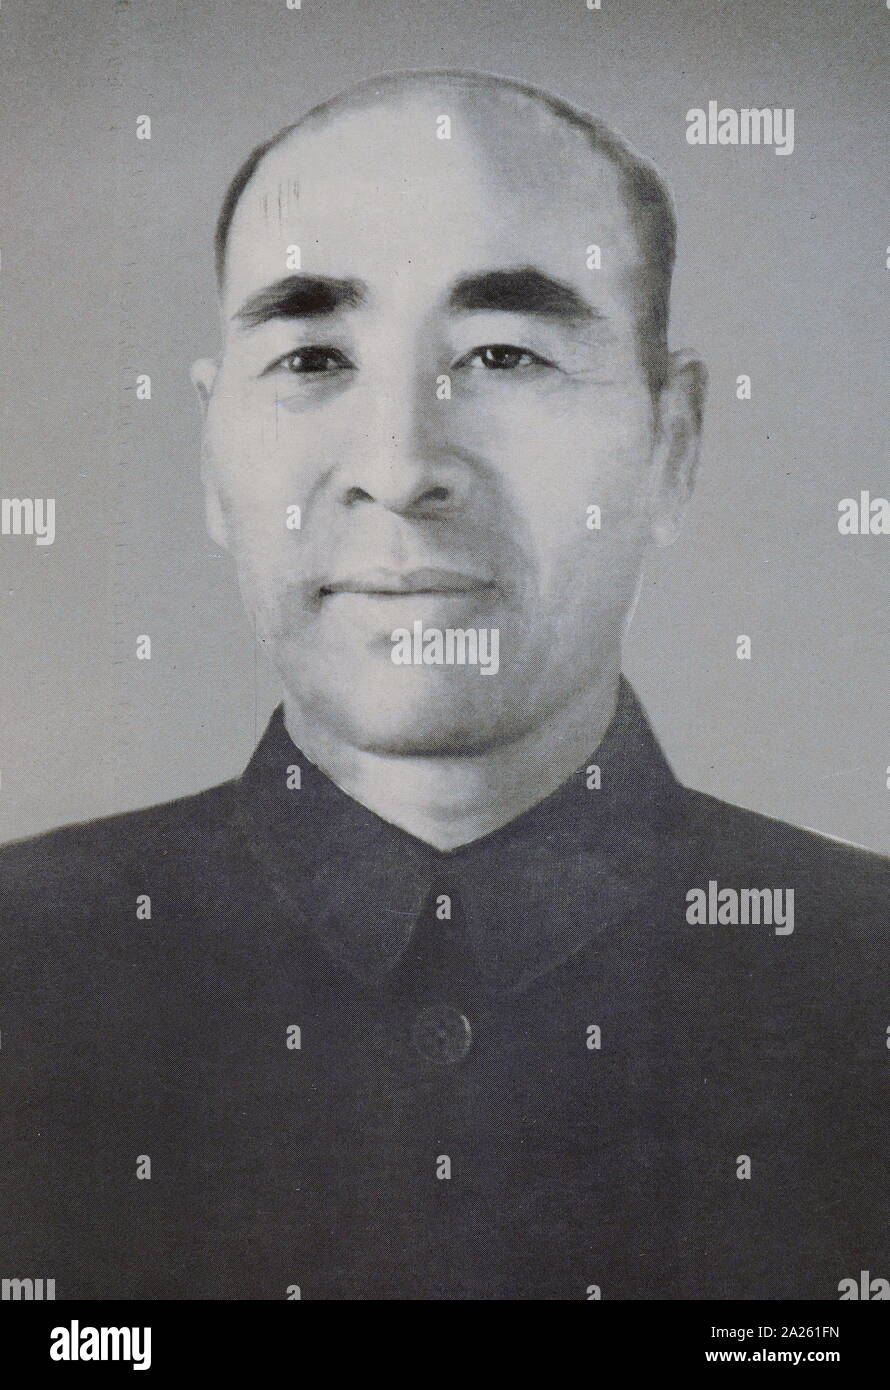 Lin Biao (1907 - 1971). Lin became instrumental in creating the foundations for Mao Zedong's cult of personality, and was rewarded in the Cultural Revolution by being named Mao's designated successor. Lin died on September 13, 1971. Nie Rongzhen (1899 - 1992) was a prominent Chinese Communist military leader, and one of ten Marshals in the People's Liberation Army of China. Stock Photo